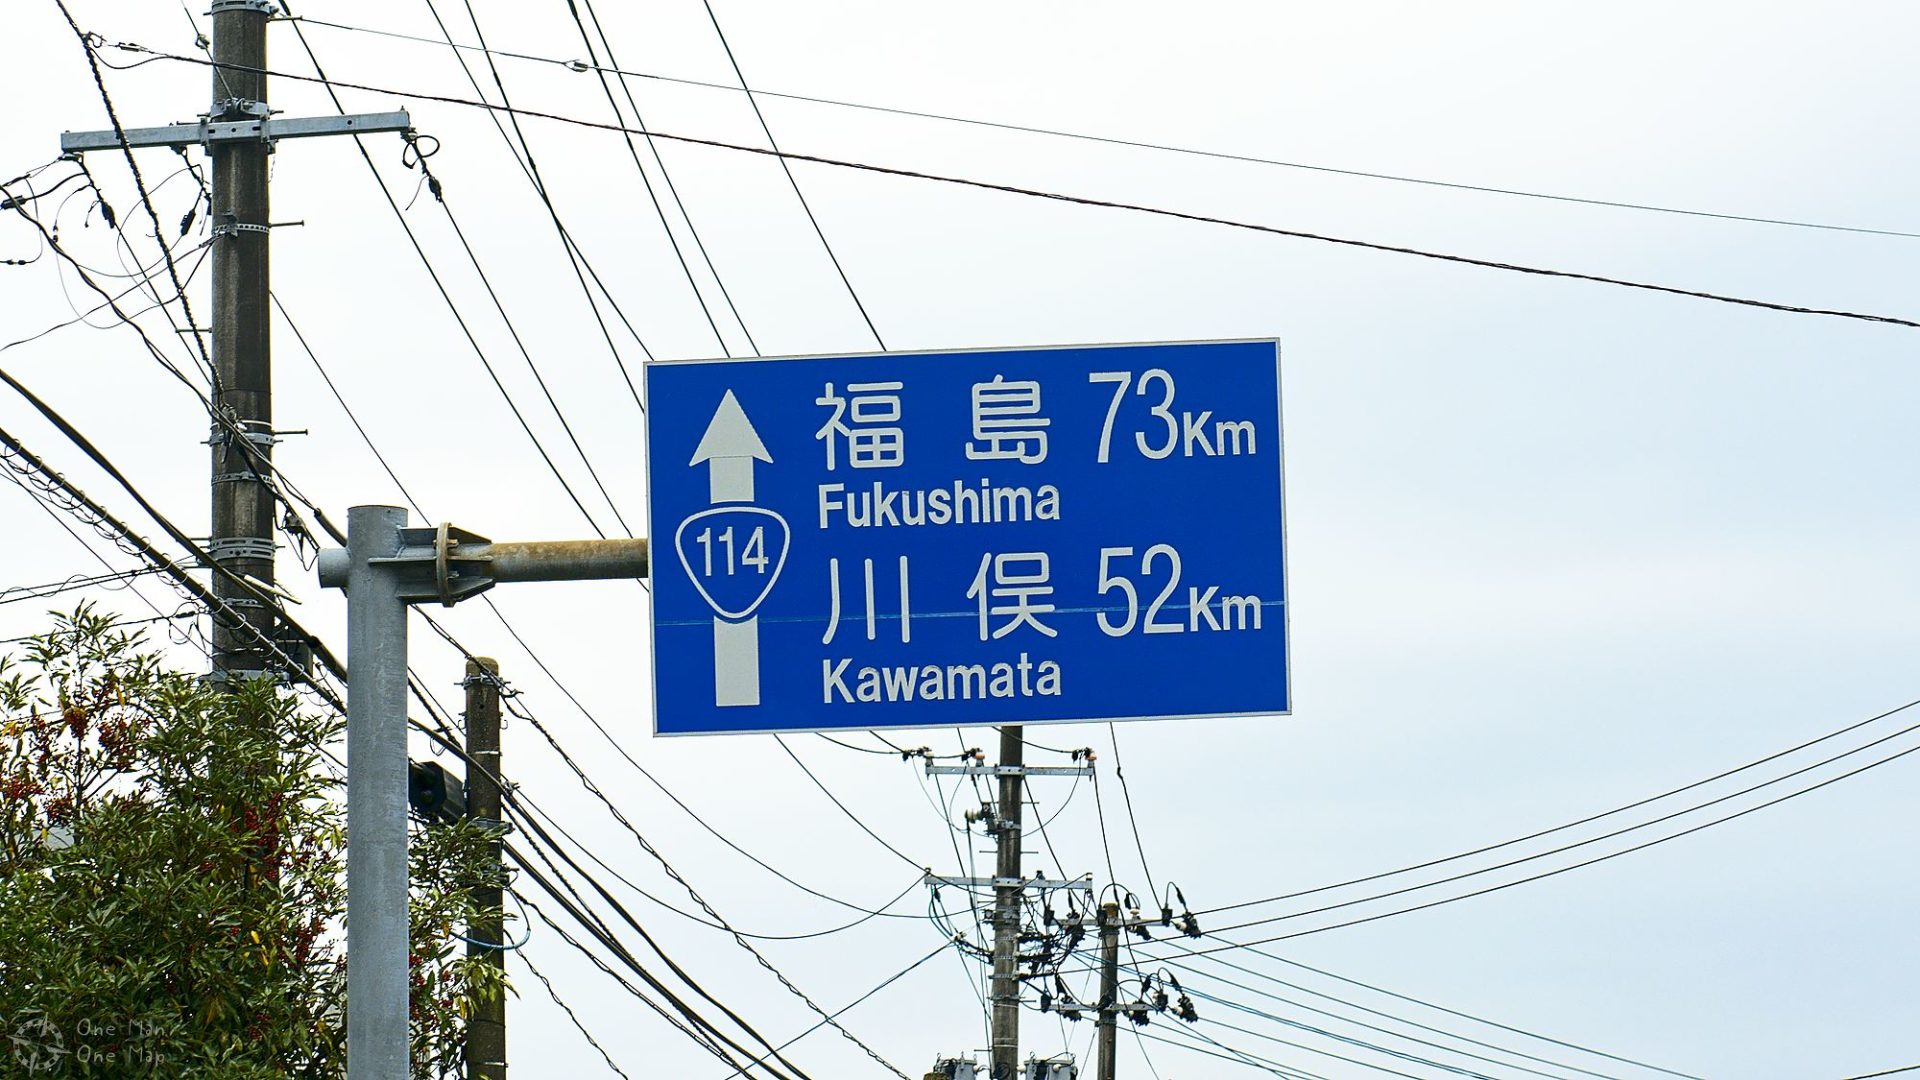 One Day In The Fukushima Nuclear Disaster Evacuation Zone One Man One Map